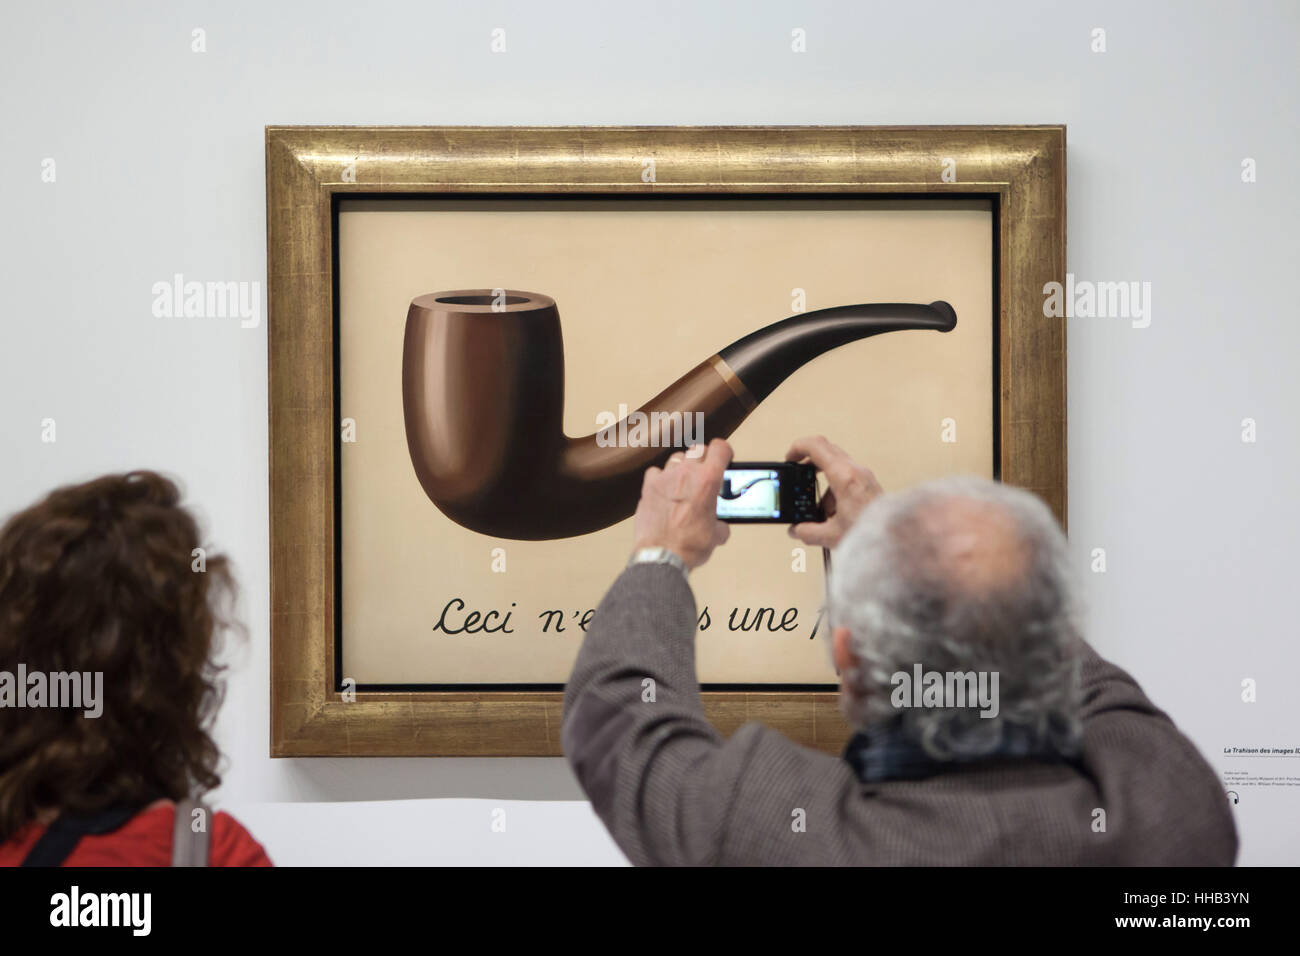 Visitor uses his smartphone to photograph the painting 'La trahison des images' ('The Treachery of Images') by Belgian surrealist artist Rene Magritte (1929) displayed at his retrospective exhibition in the Centre Pompidou in Paris, France. The French inscription 'Ceci n'est pas une pipe' means 'This is not a pipe'. The exhibition entitled 'Rene Magritte. The Treachery of Images' runs till 23 January 2017. After that the reformulated version of the exhibition will be presented at the Schirn Kunsthalle in Frankfurt am Main, Germany, from 10 February to 5 June 2017. Stock Photo